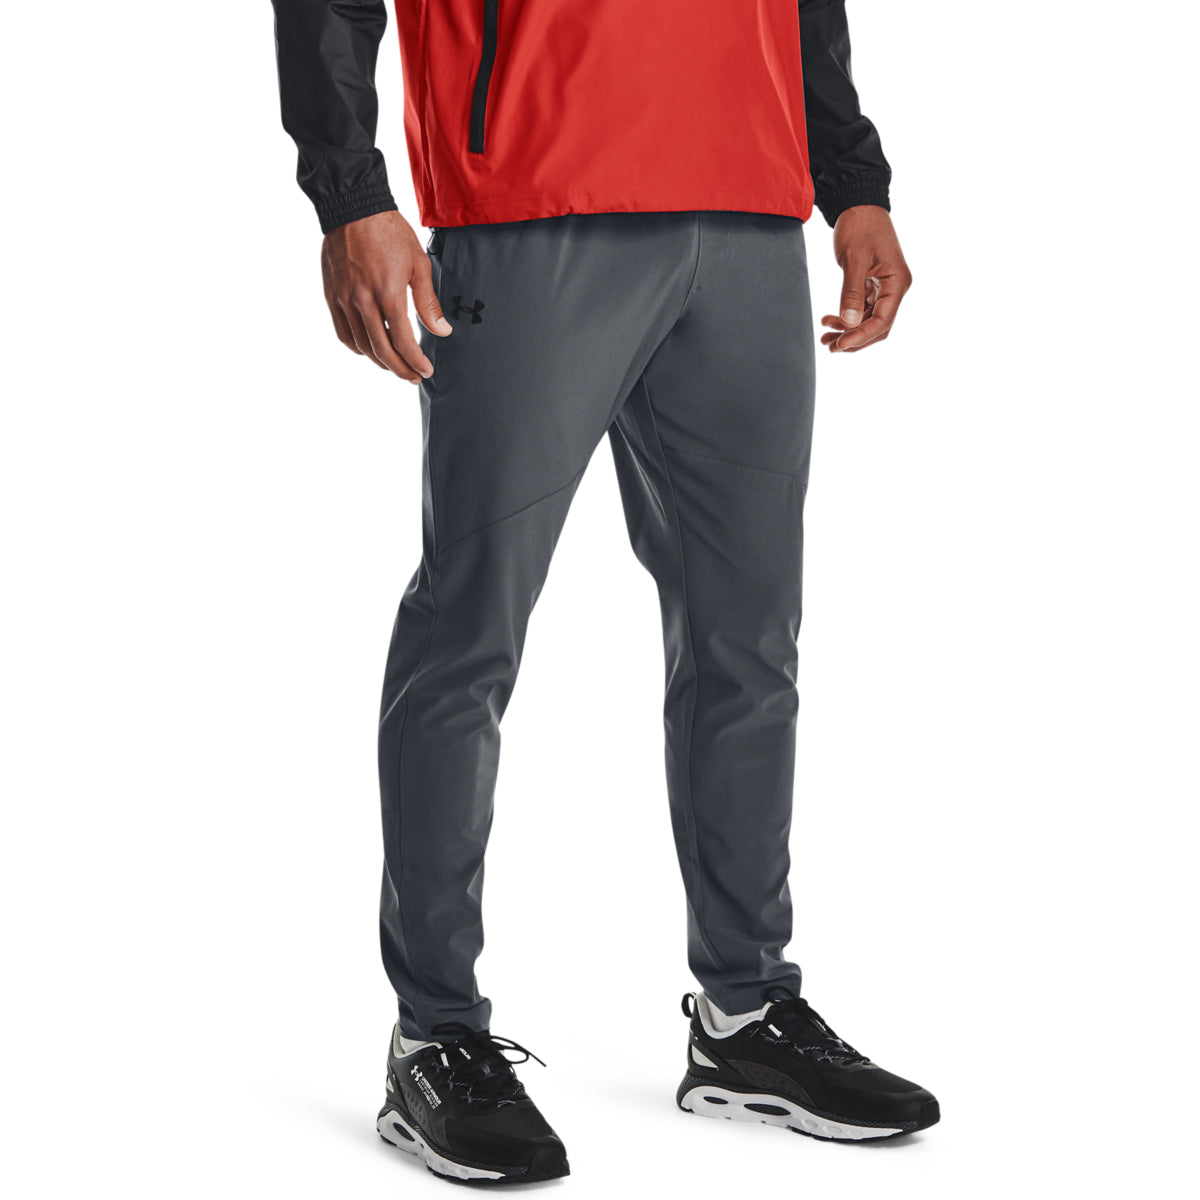 Under Armor Stretch Pants - Gray